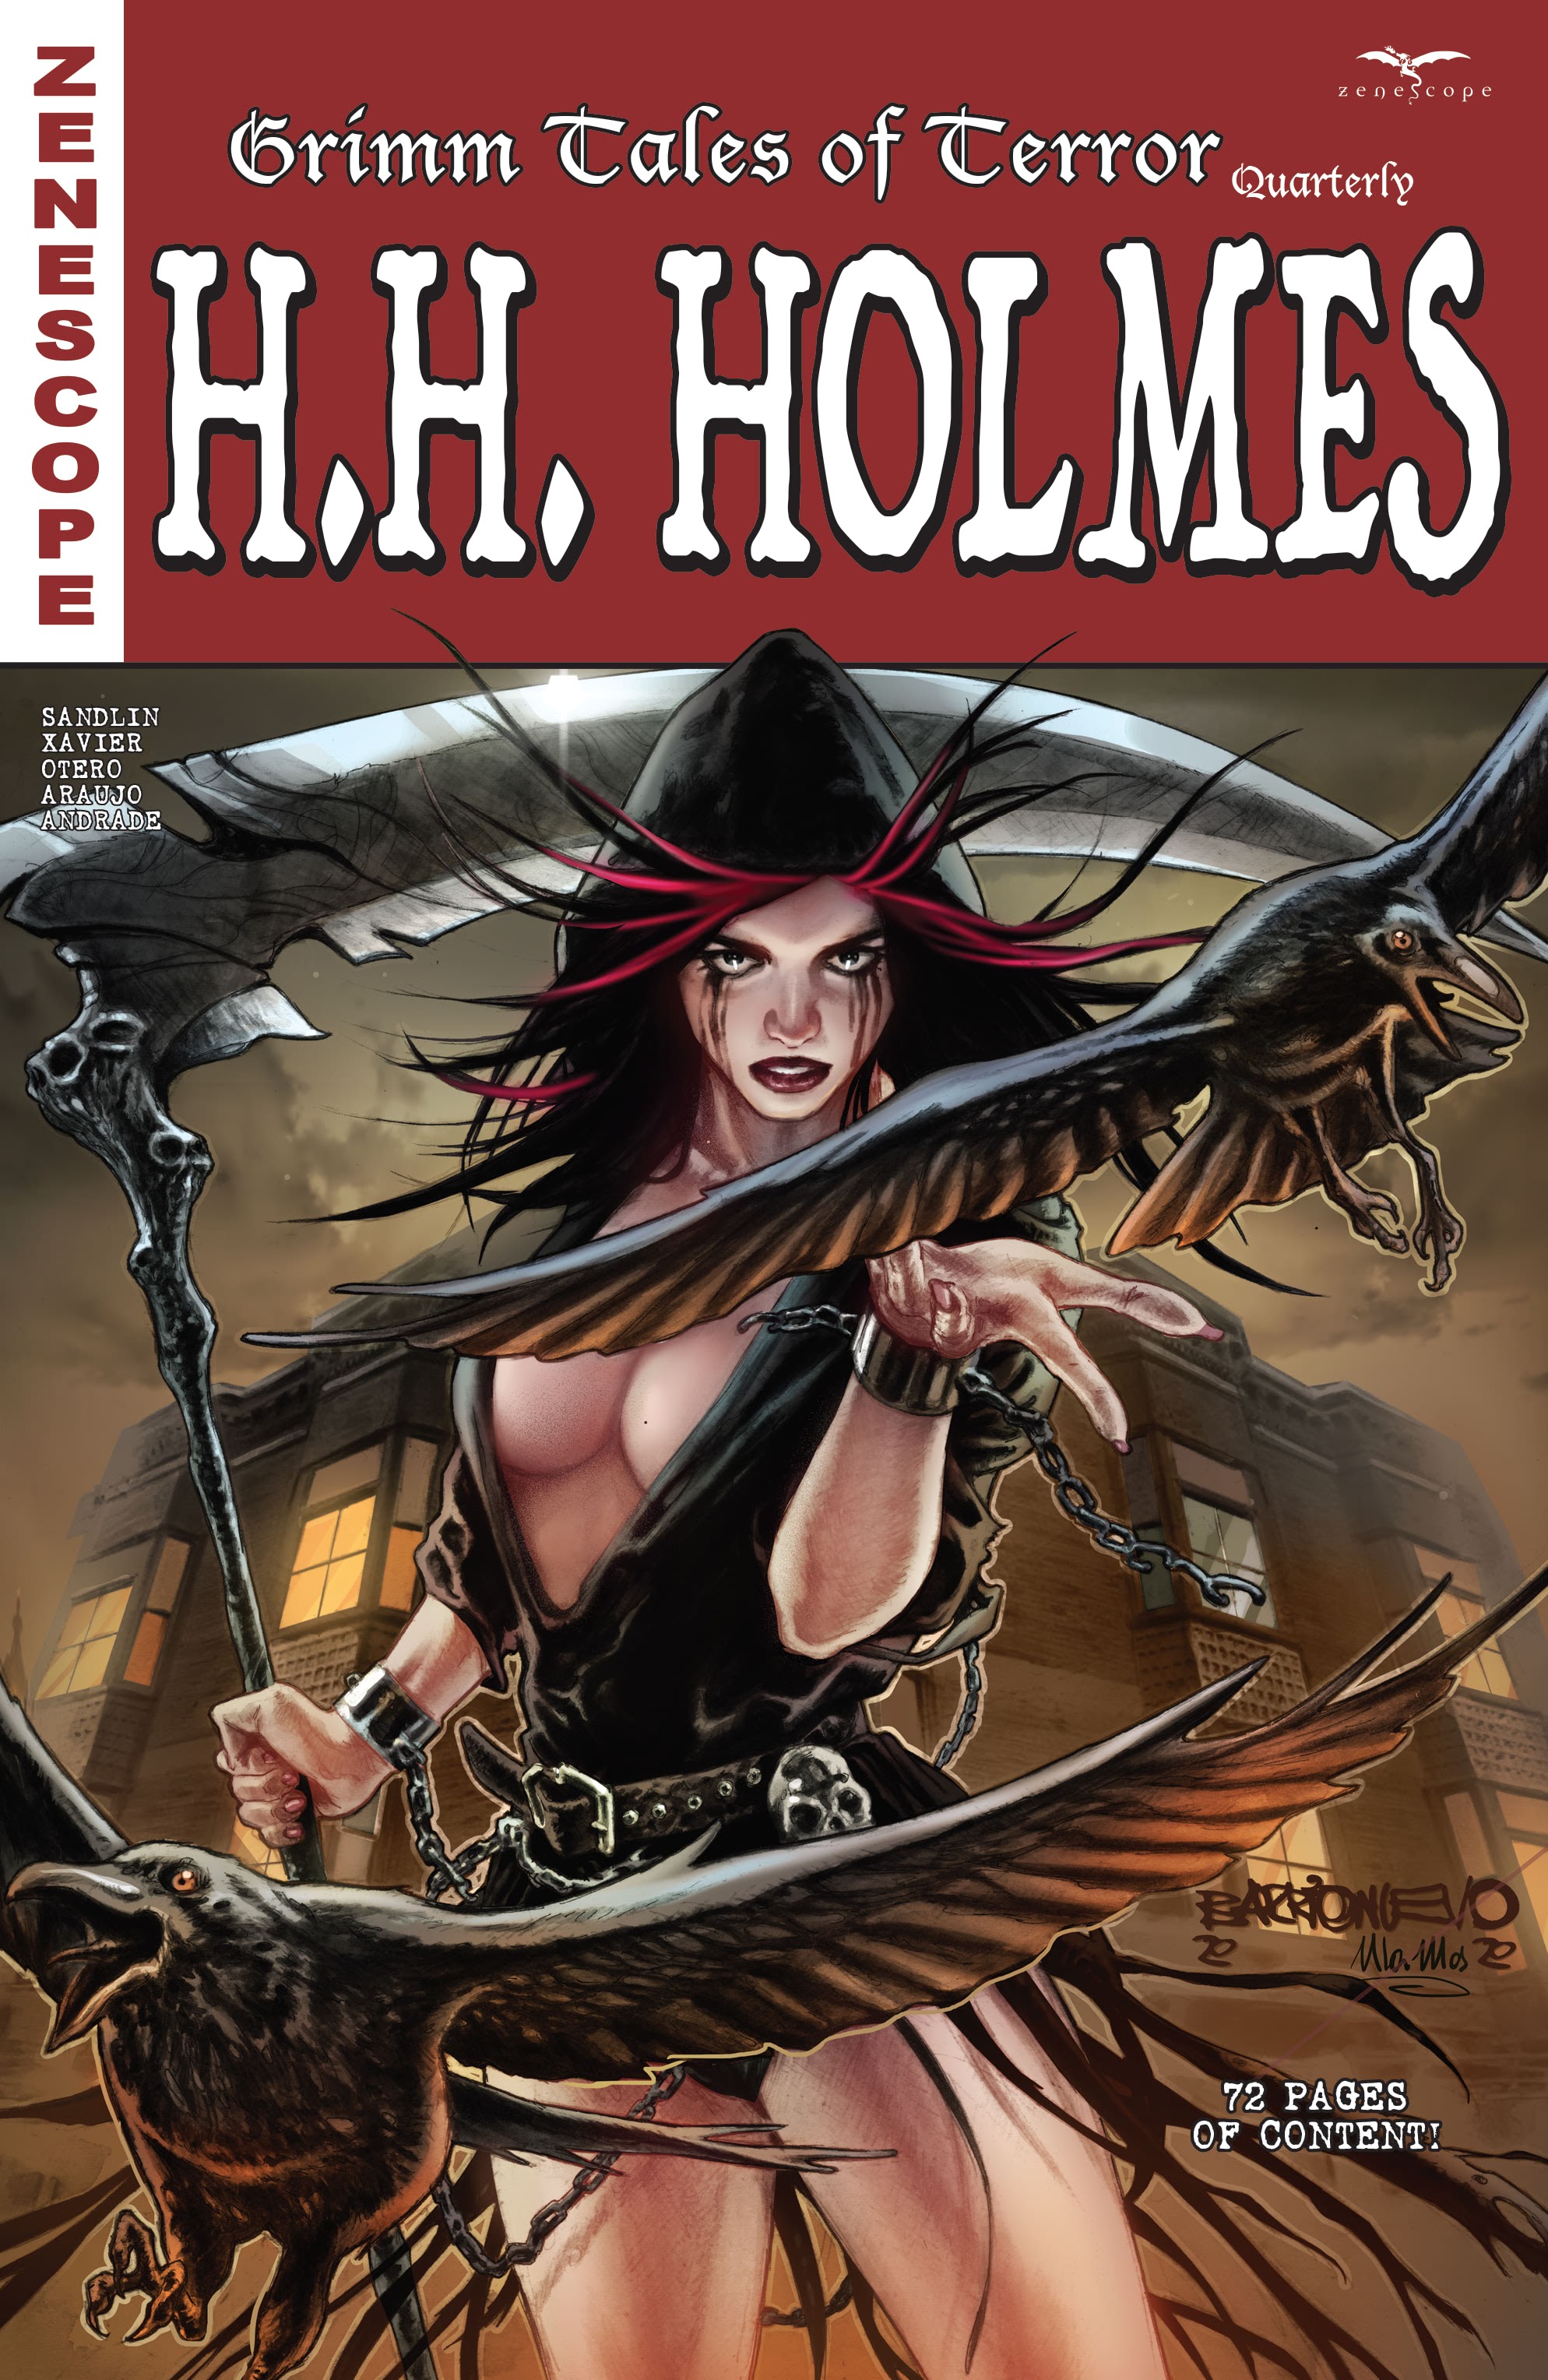 Read online Grimm Tales of Terror Quarterly: H.H. Holmes comic -  Issue # Full - 1